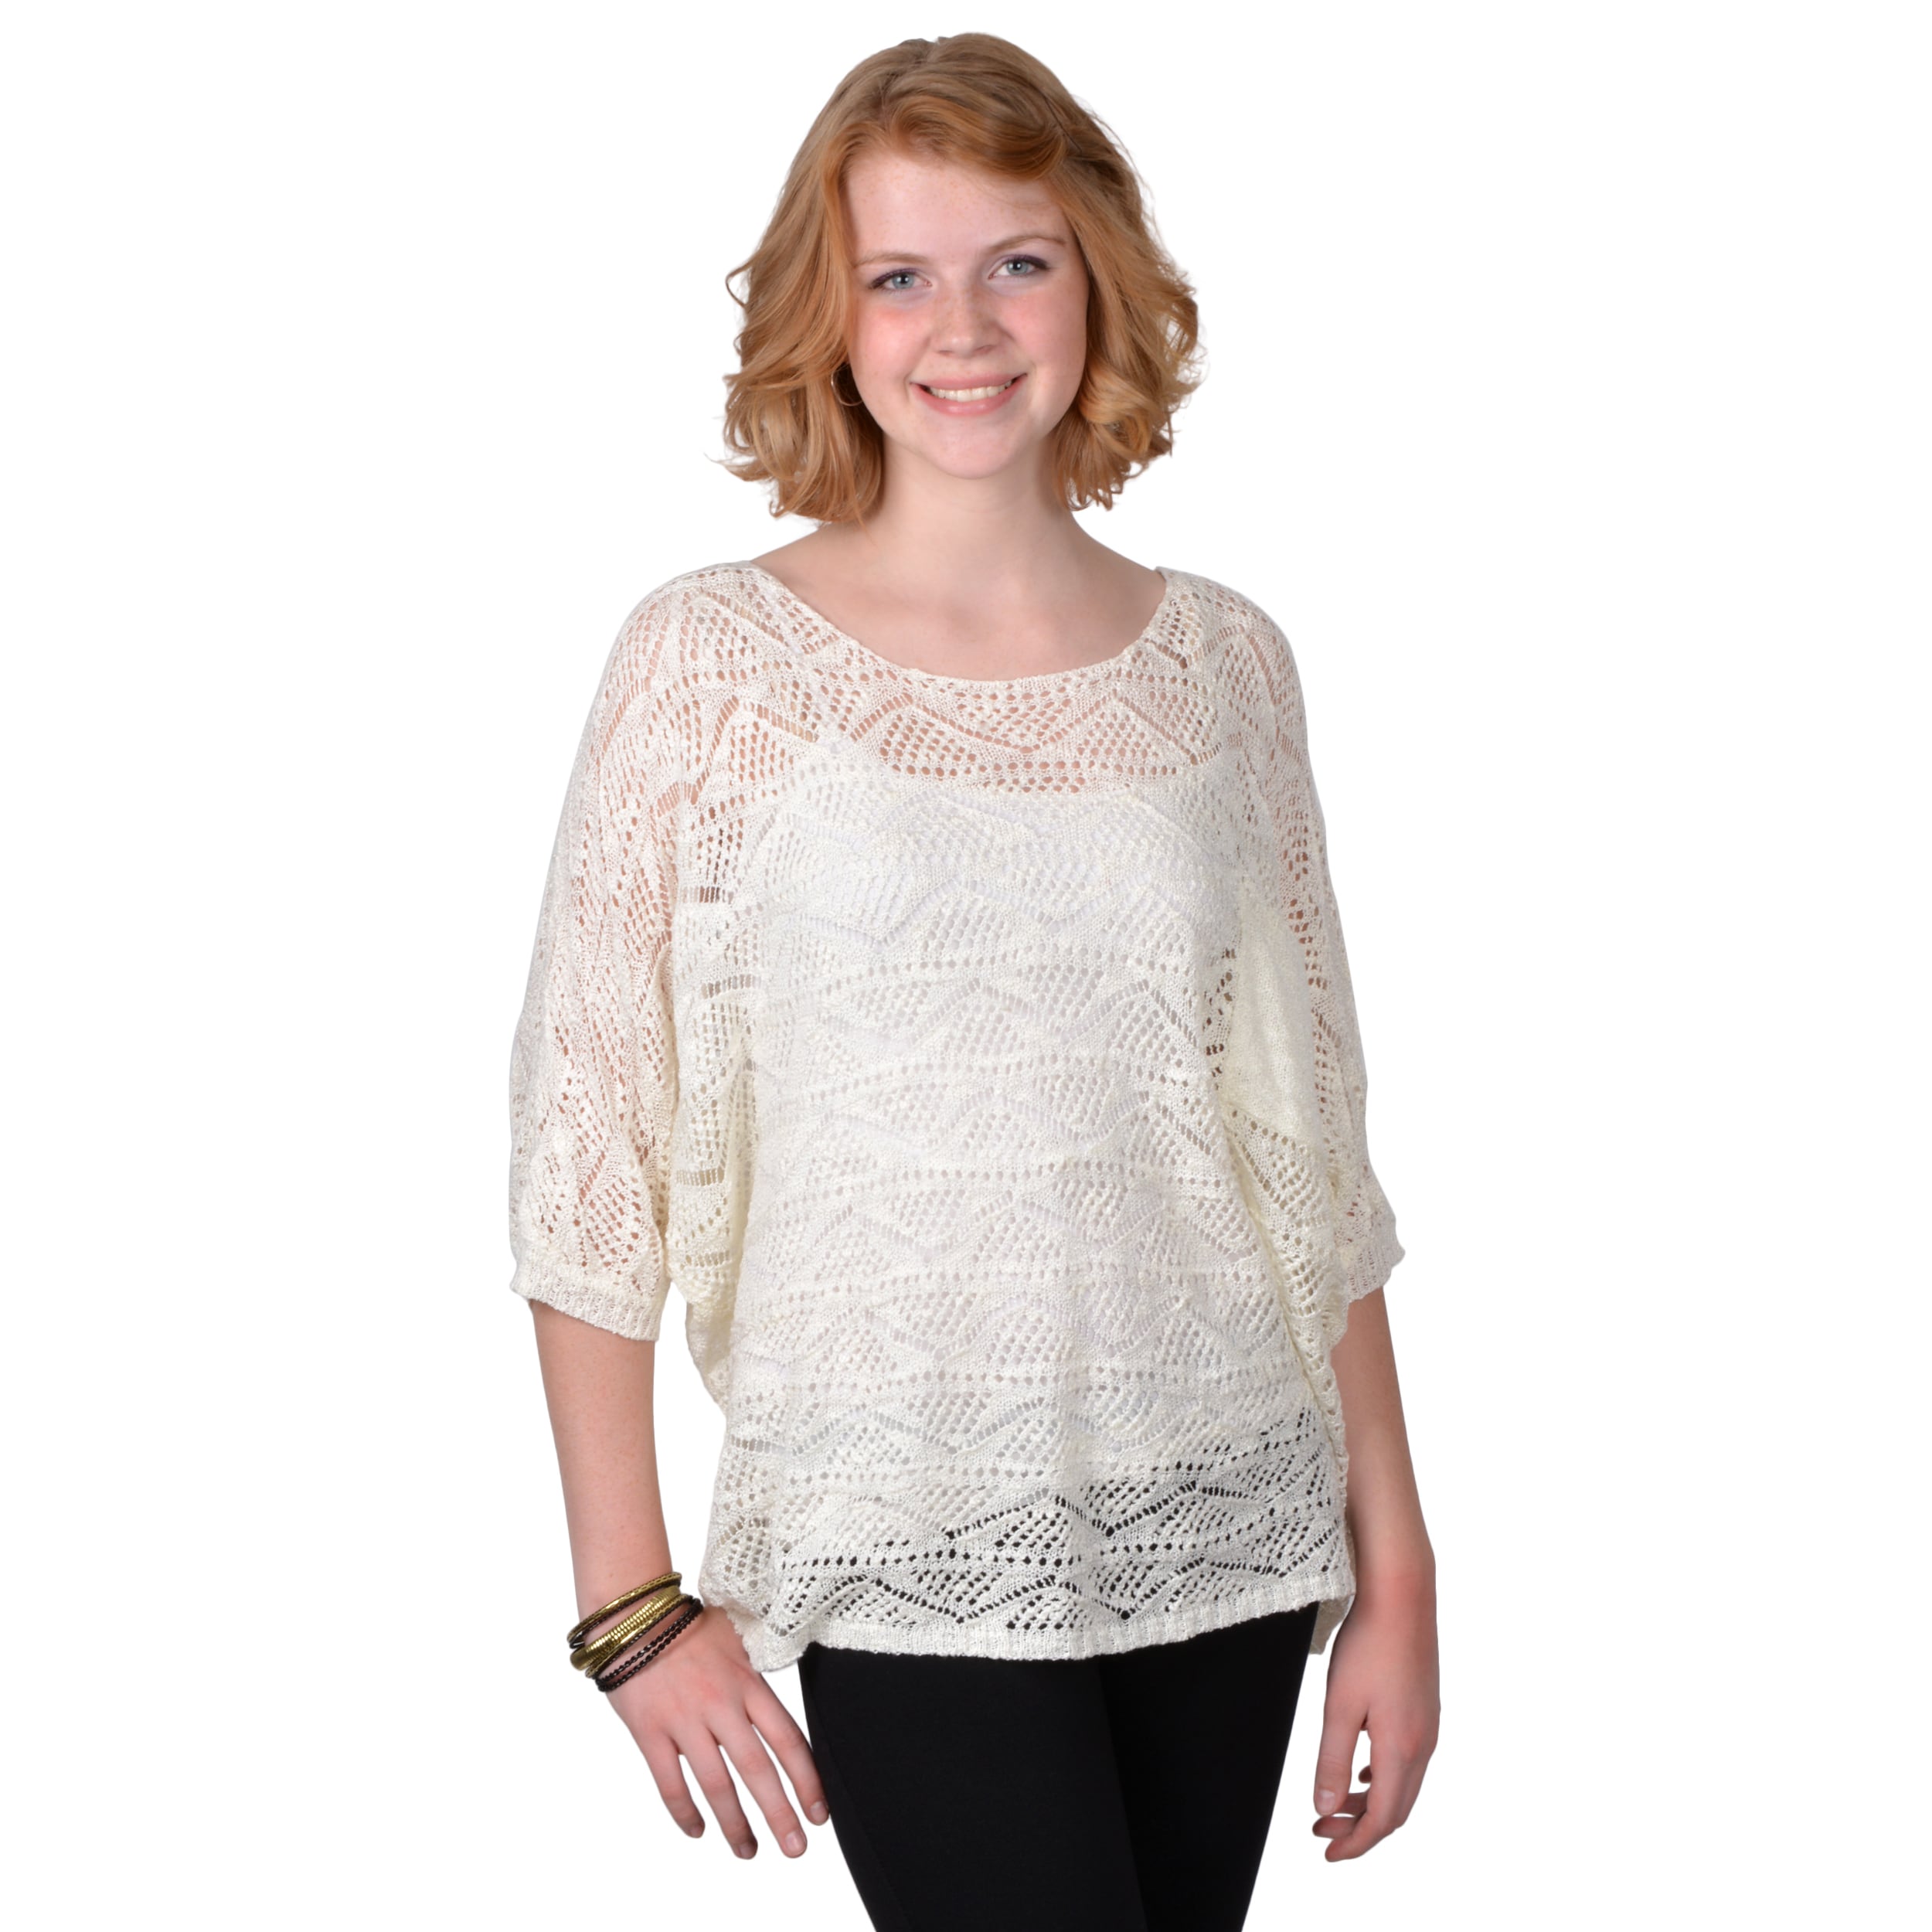 Journee Collection Journee Collection Womens Short sleeve Crochet Top White Size M (8  10)